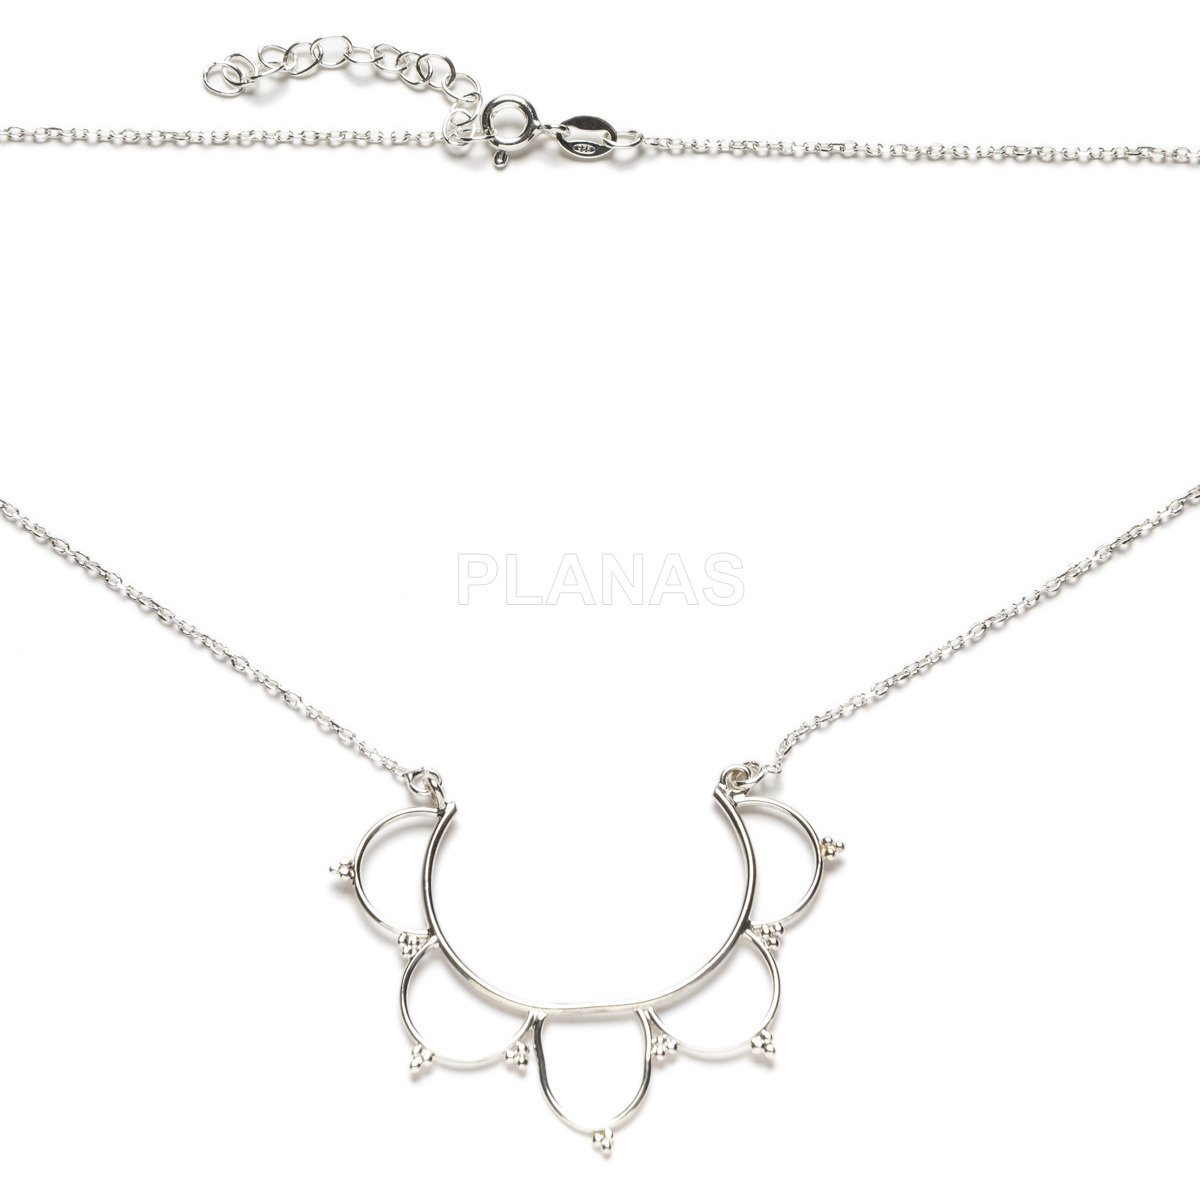 Sterling silver necklace.